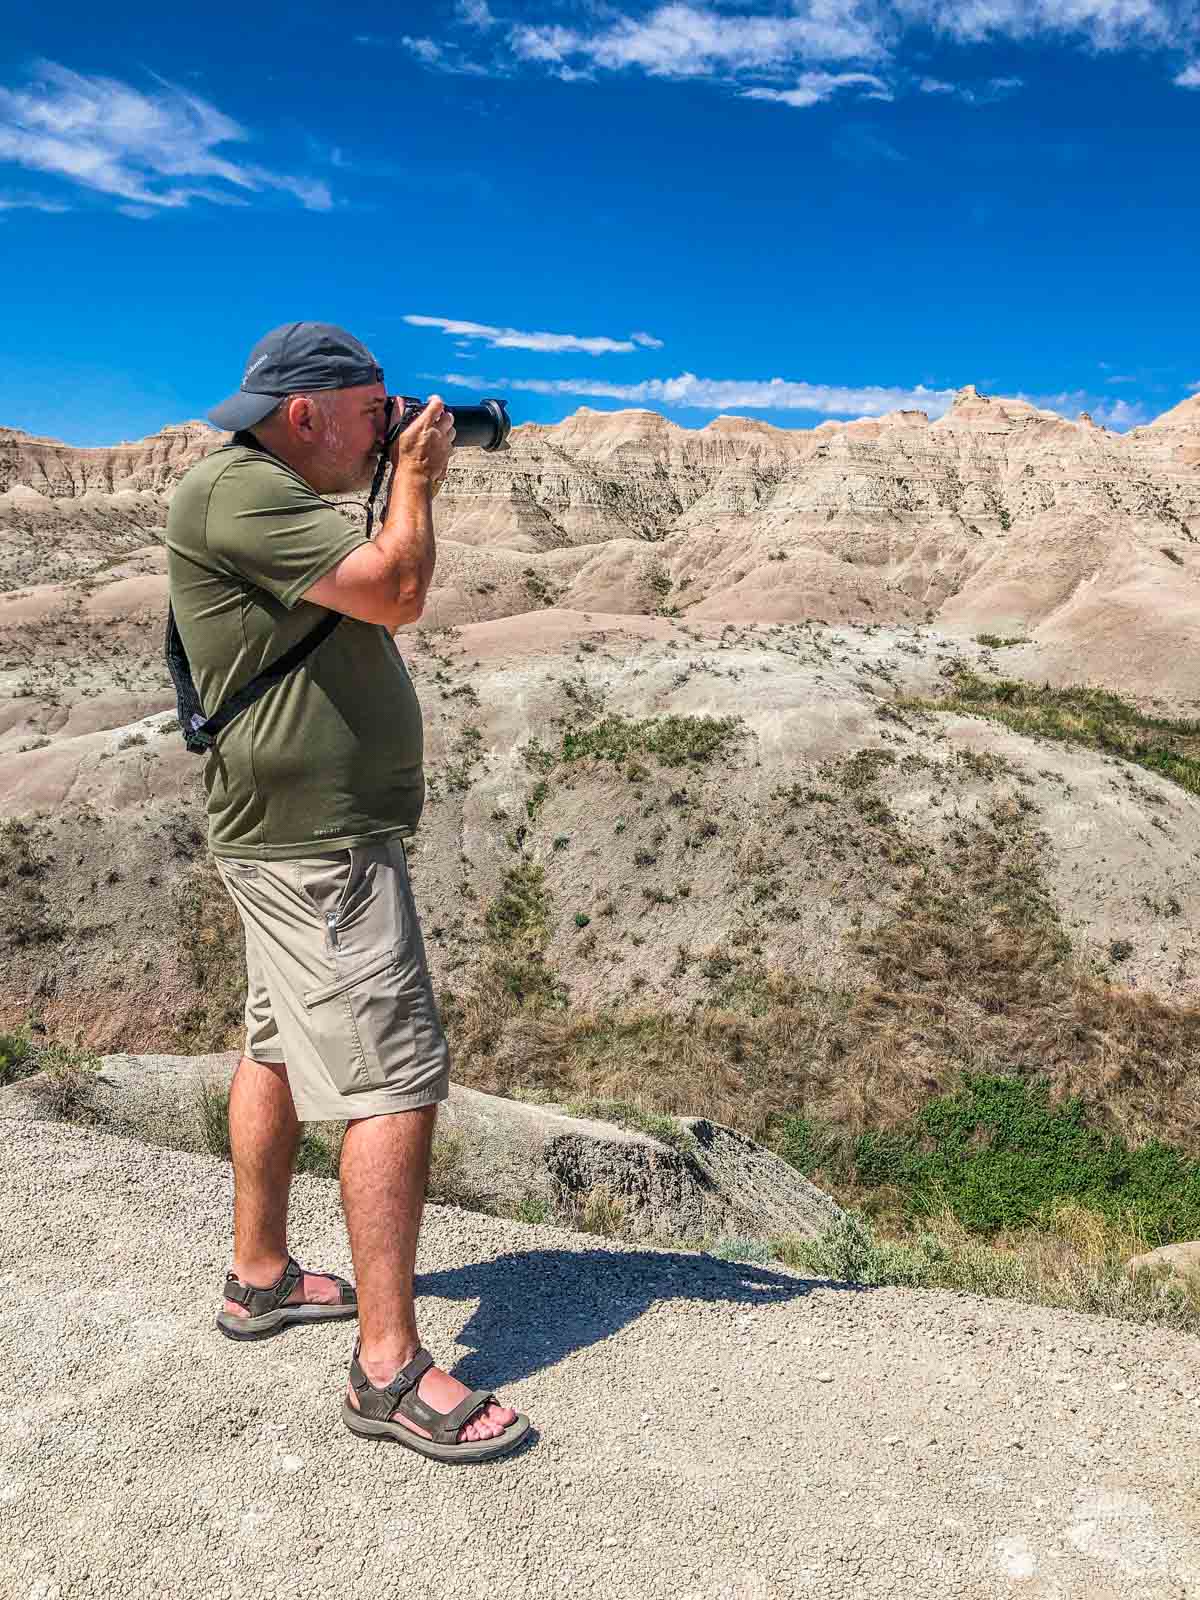 Grant taking a picture with the RX10 in Badlands National Park.